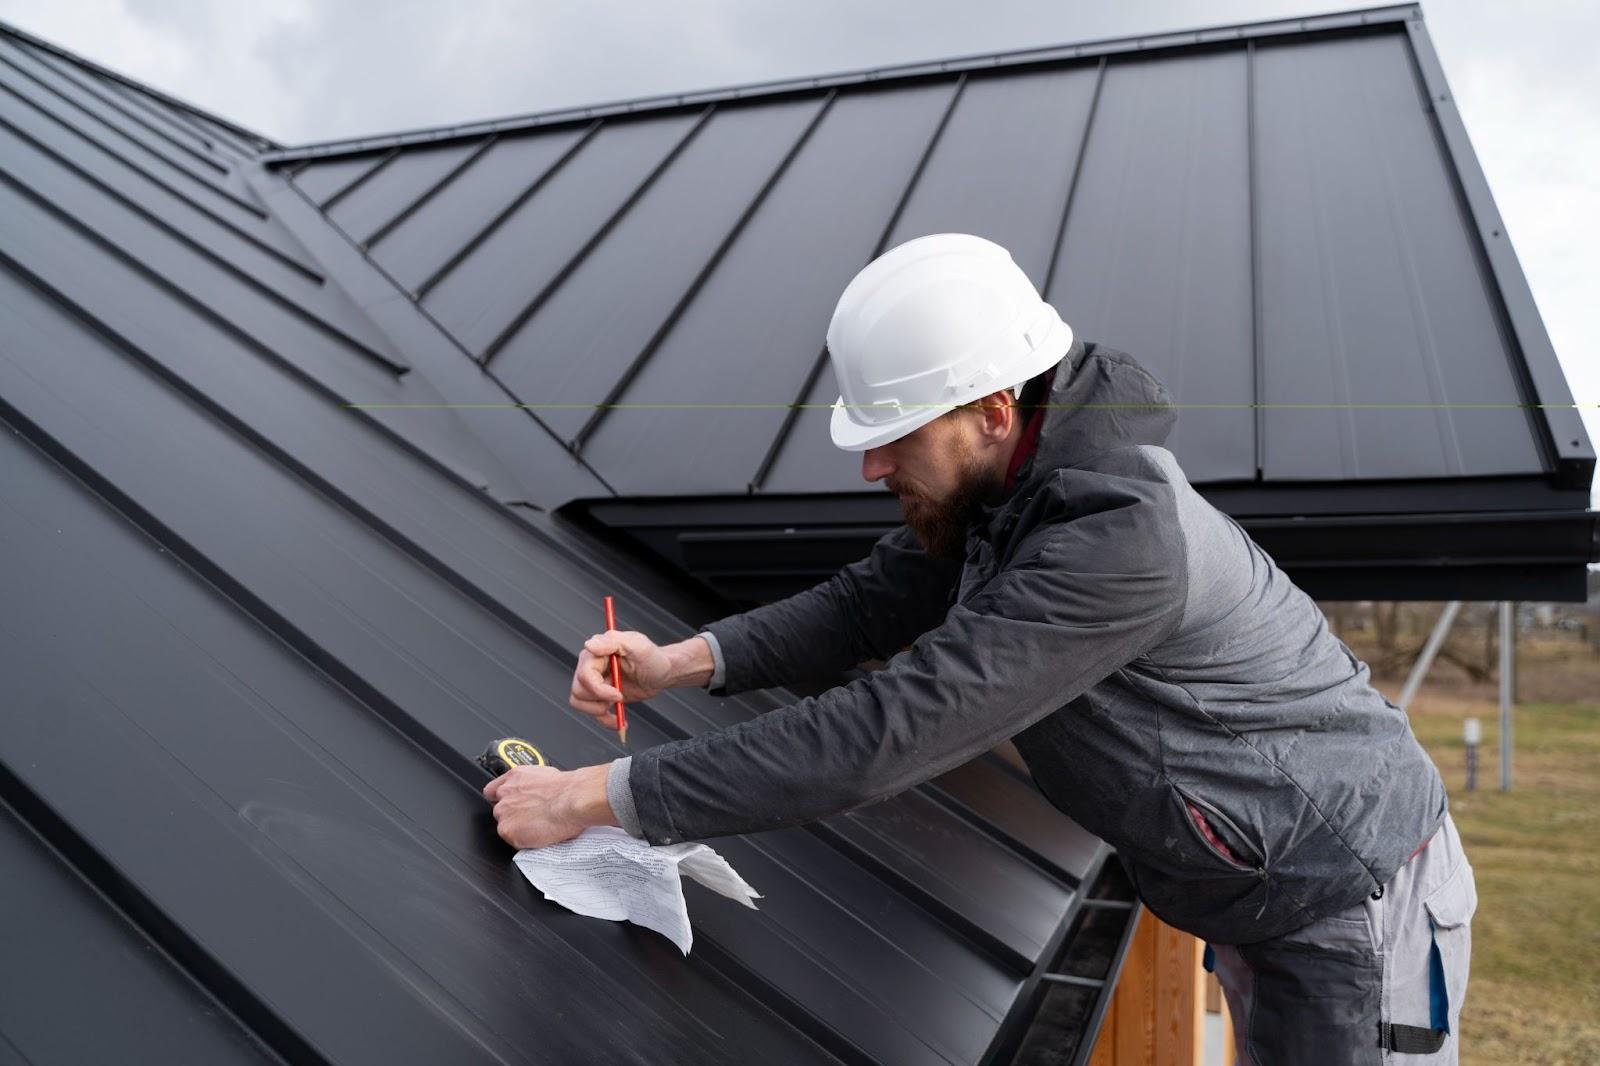 How to Choose the Best Roofing Underlayment – A Simple Guide